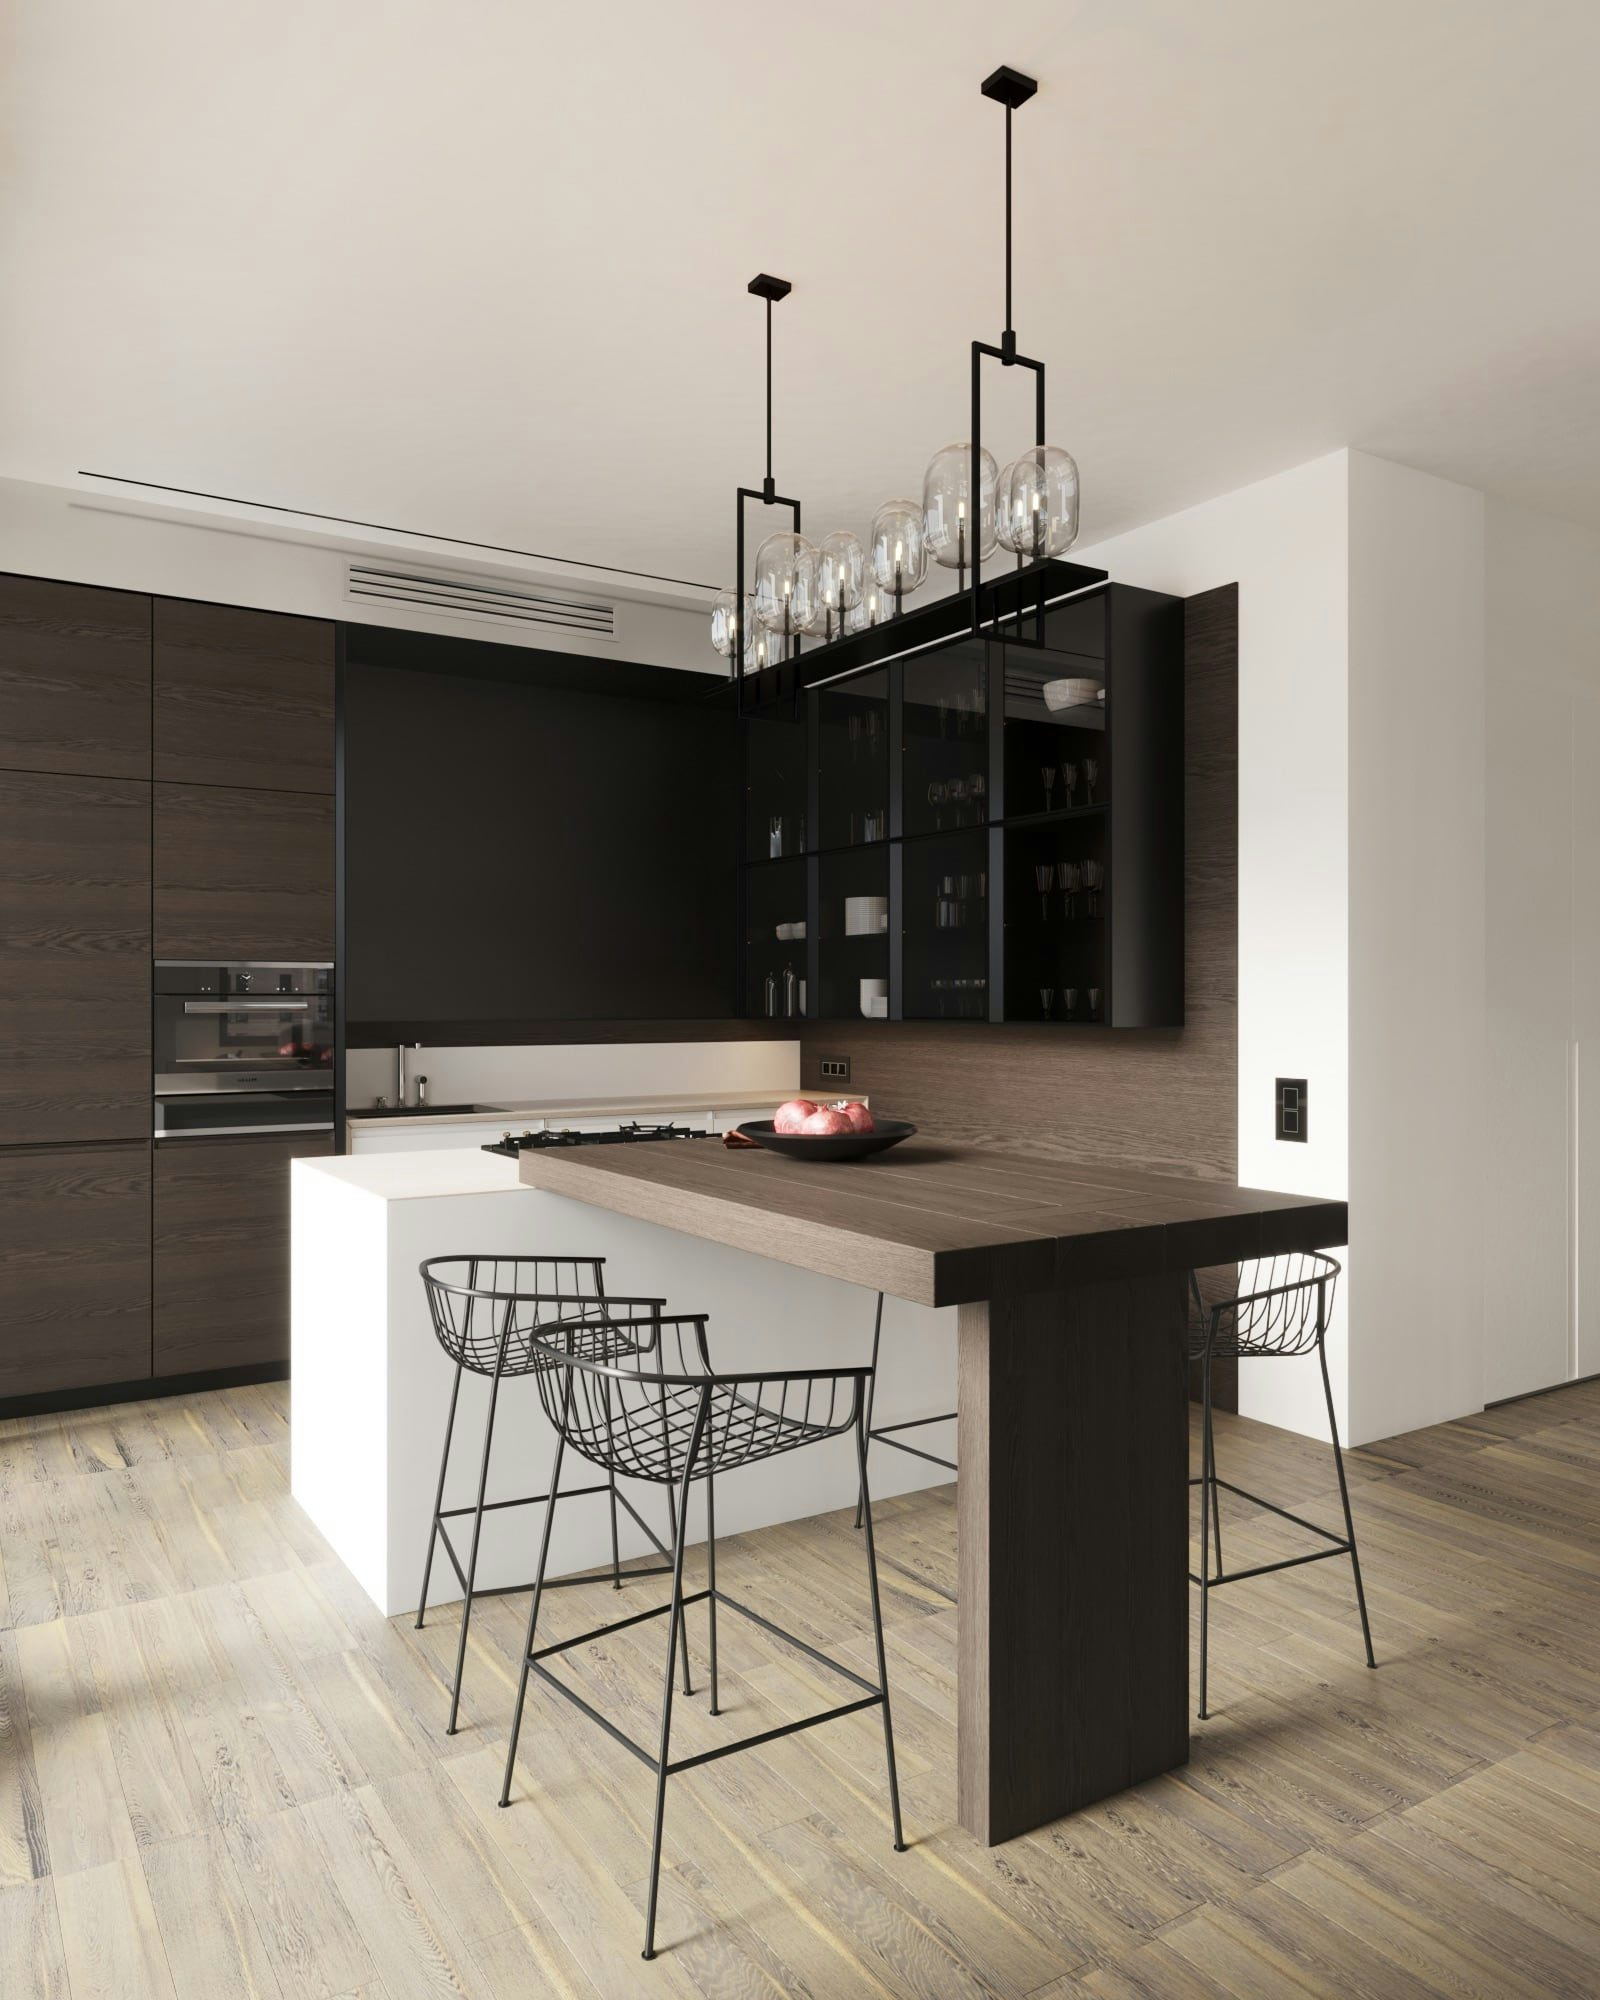 3D architectural visualization of kitchen space in a minimalistic apartment in Berlin